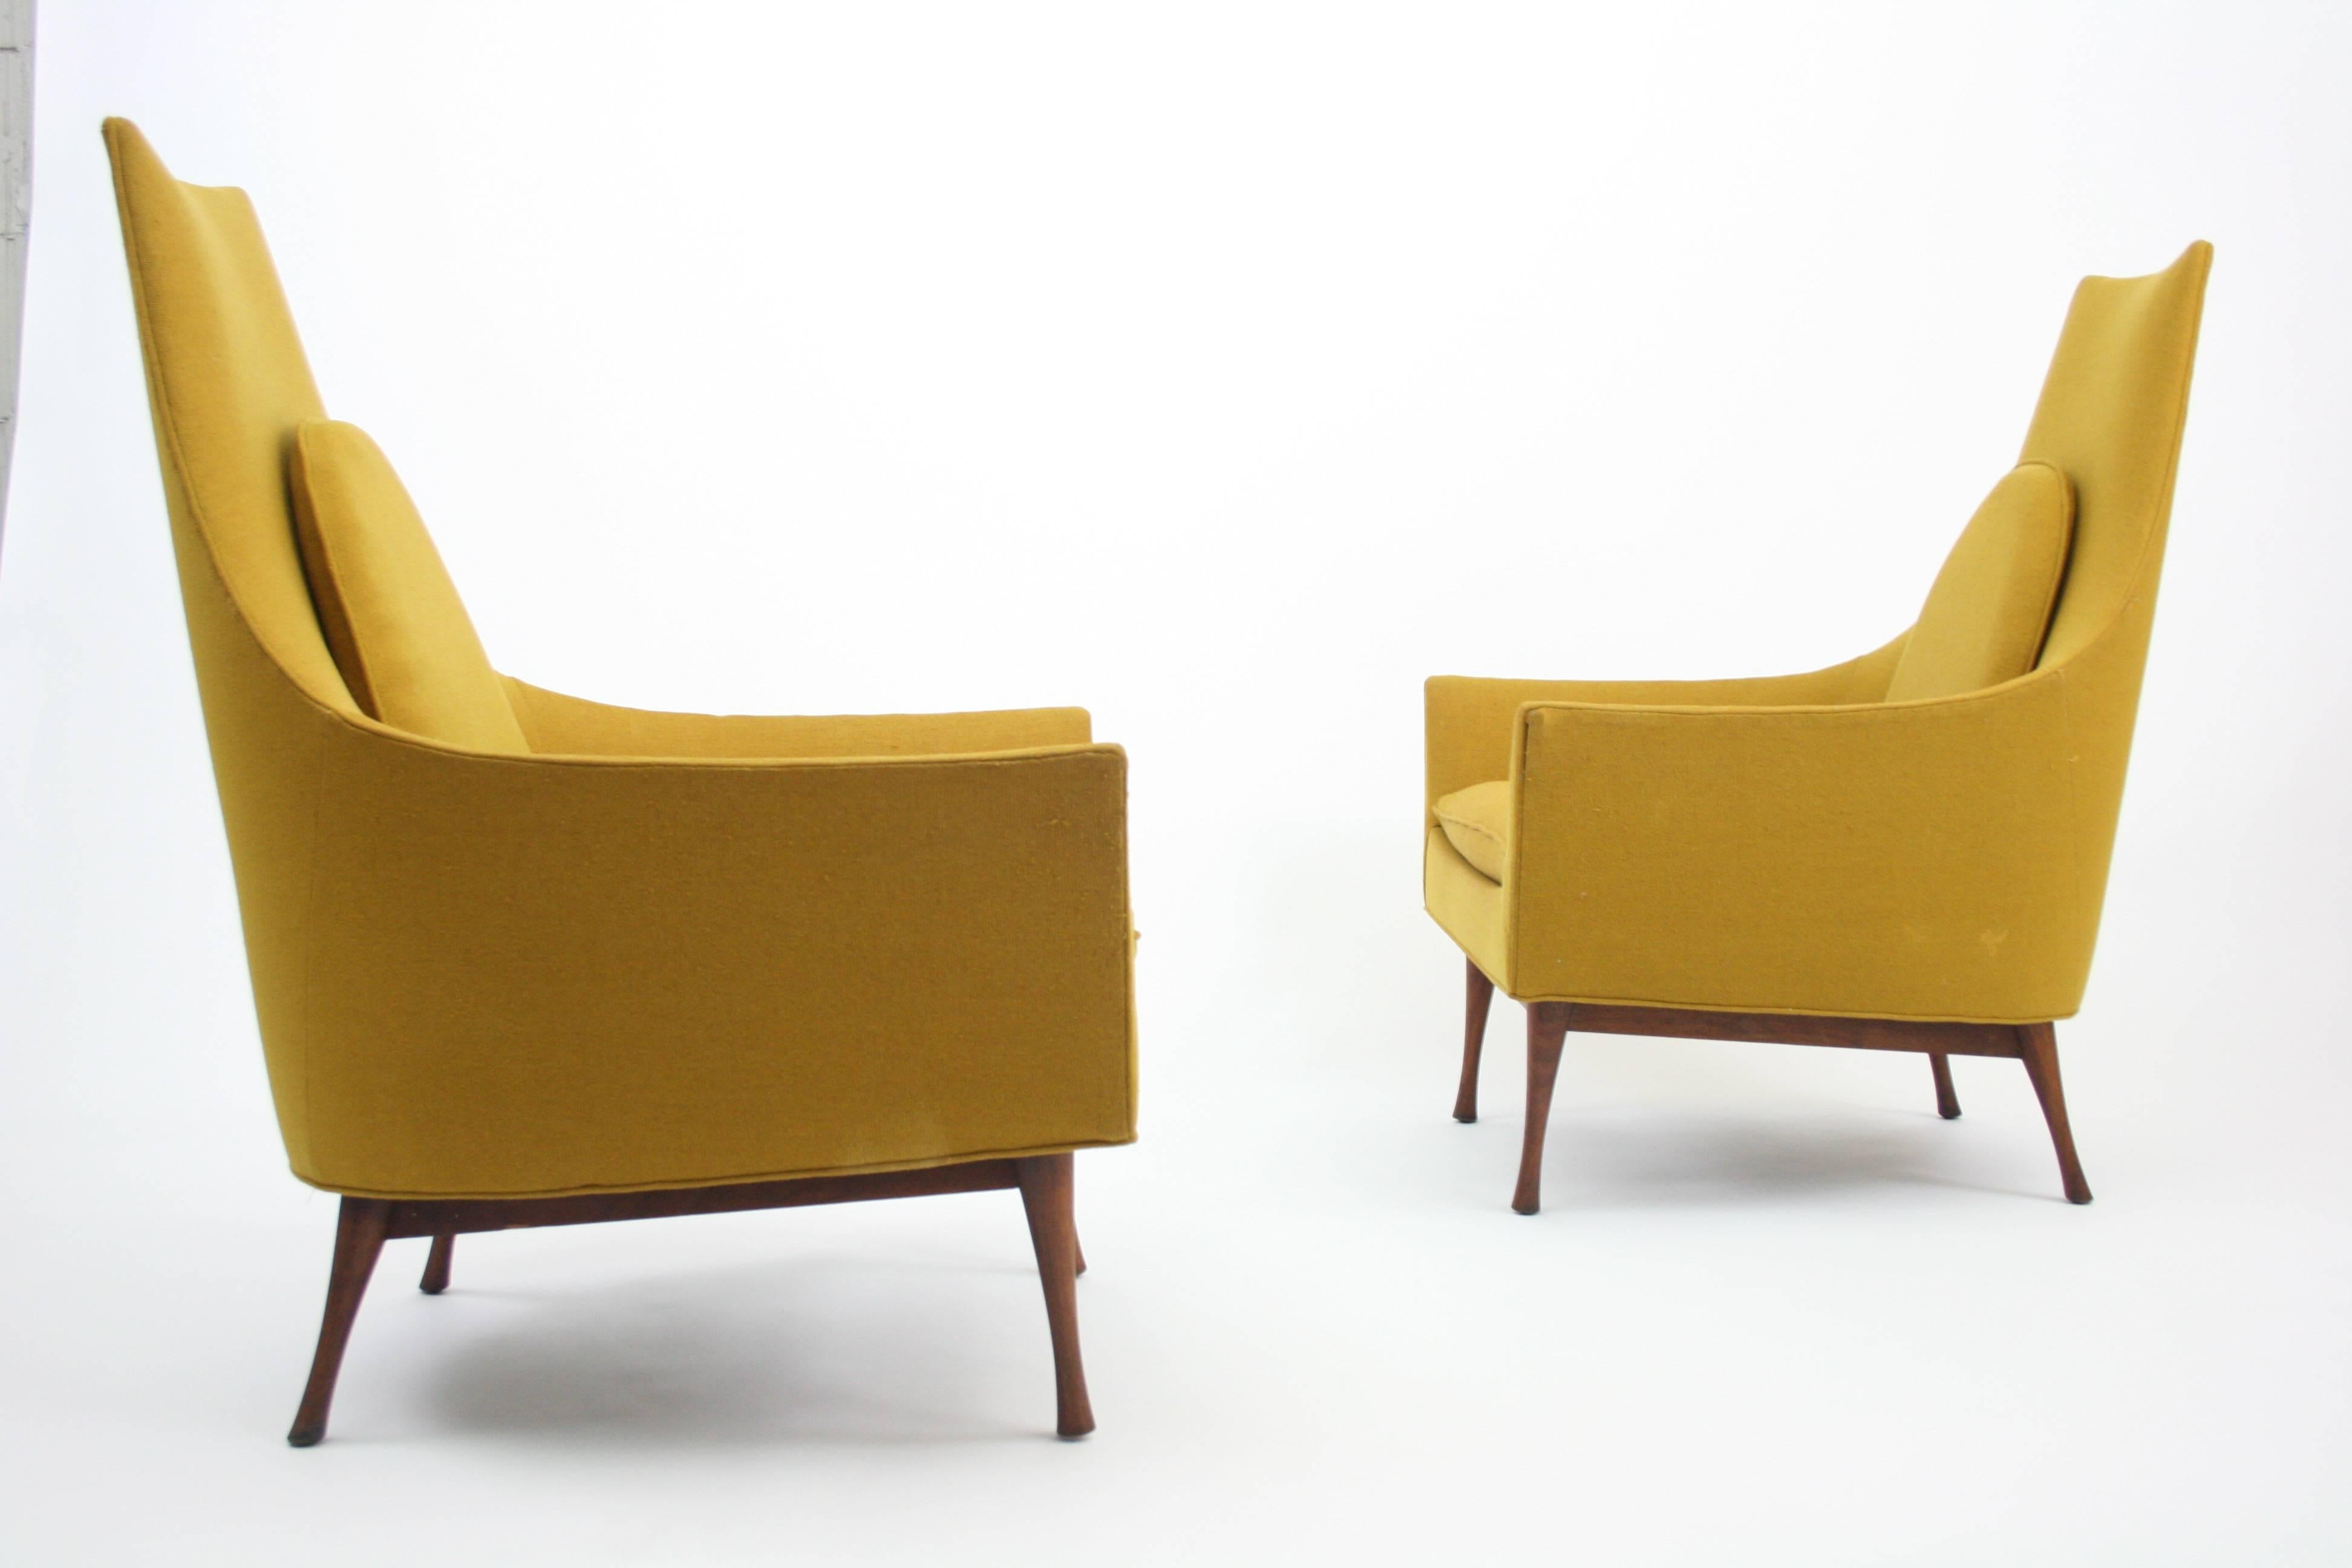 20th Century Rare Pair of Lounge Chairs by Paul McCobb for Widdicomb